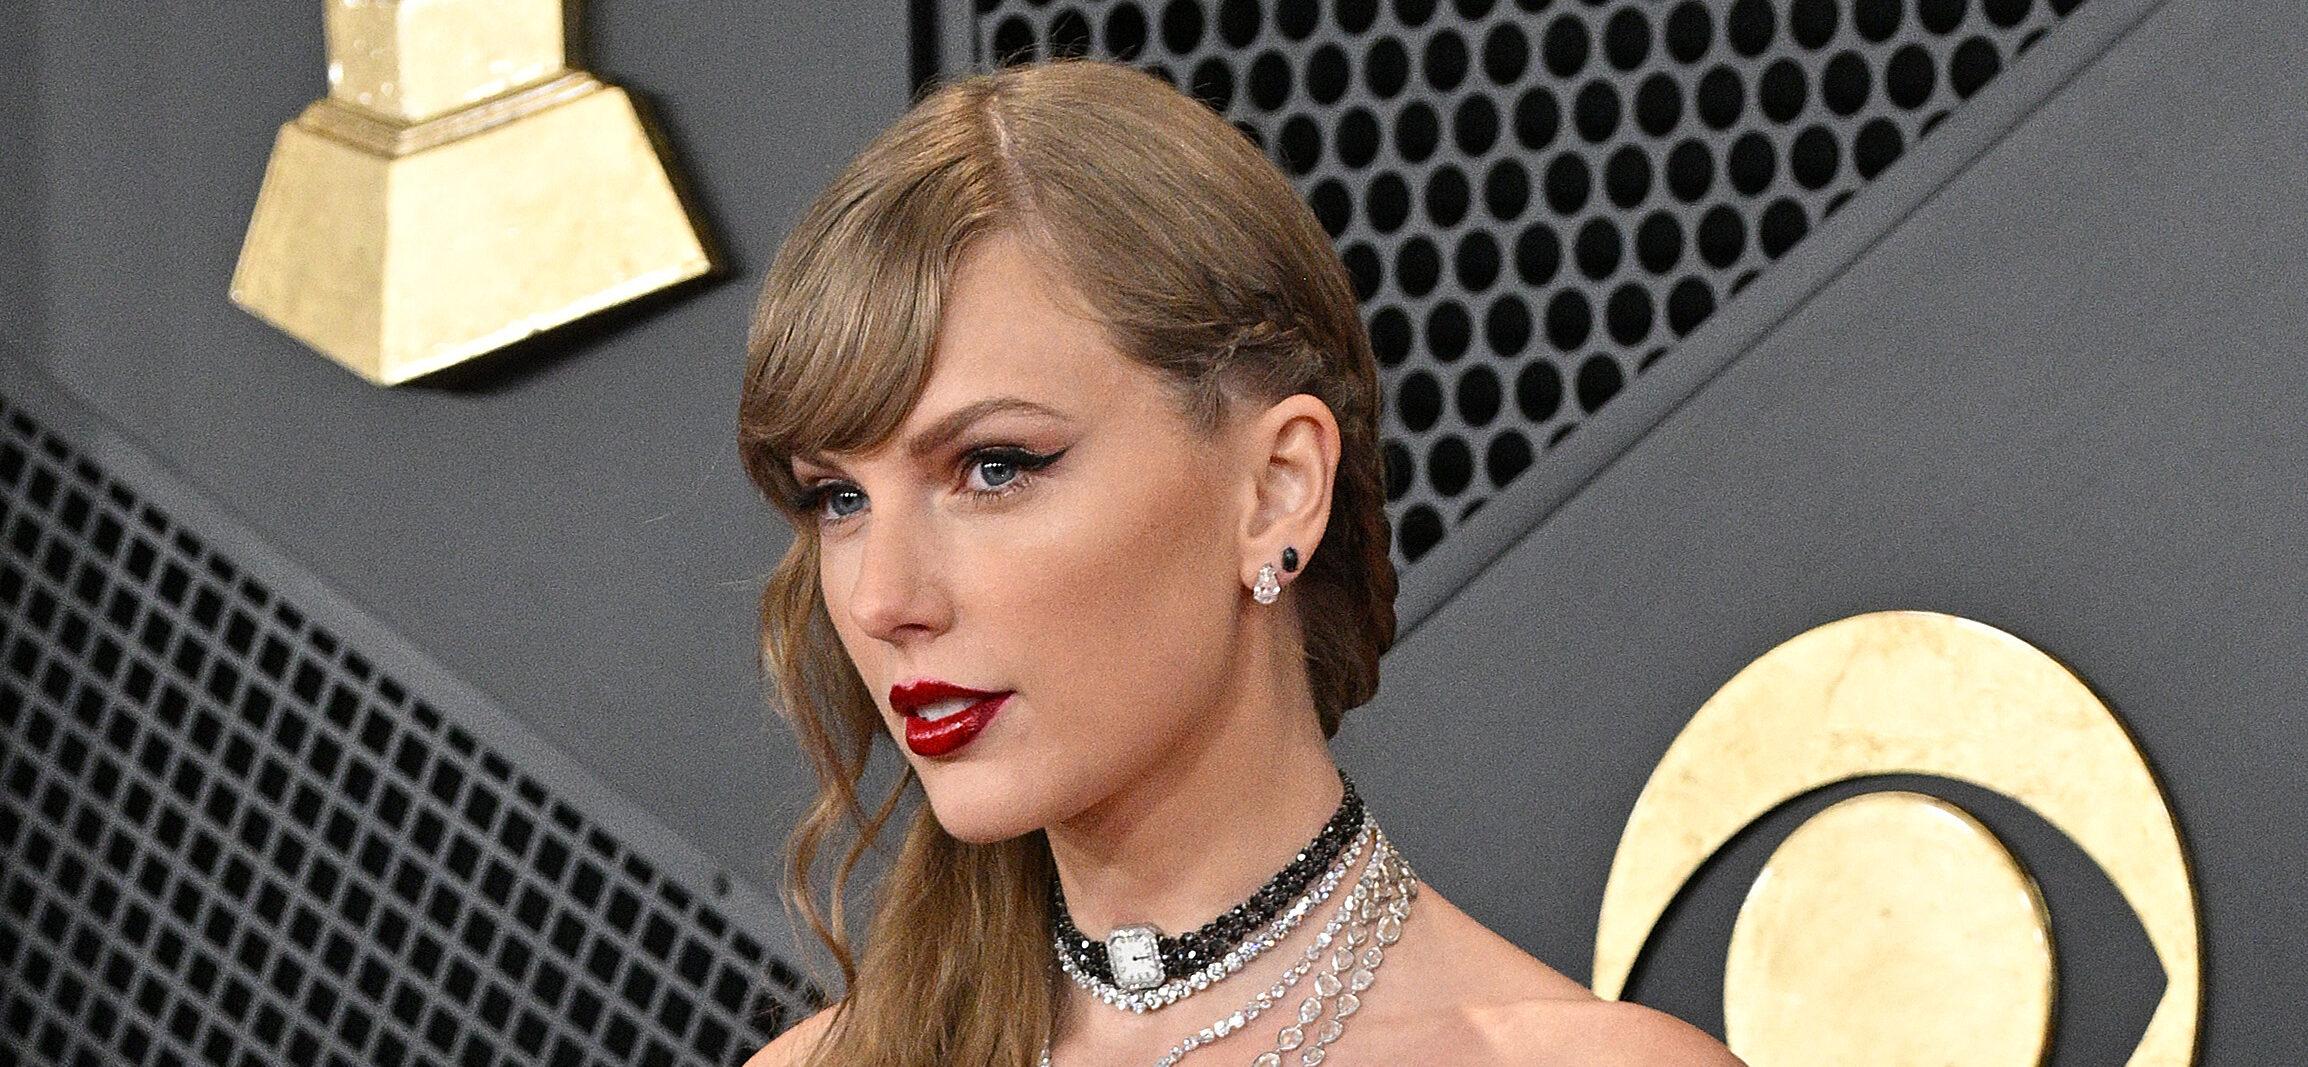 The Surprising Connection Between Taylor Swift And Toby Keith